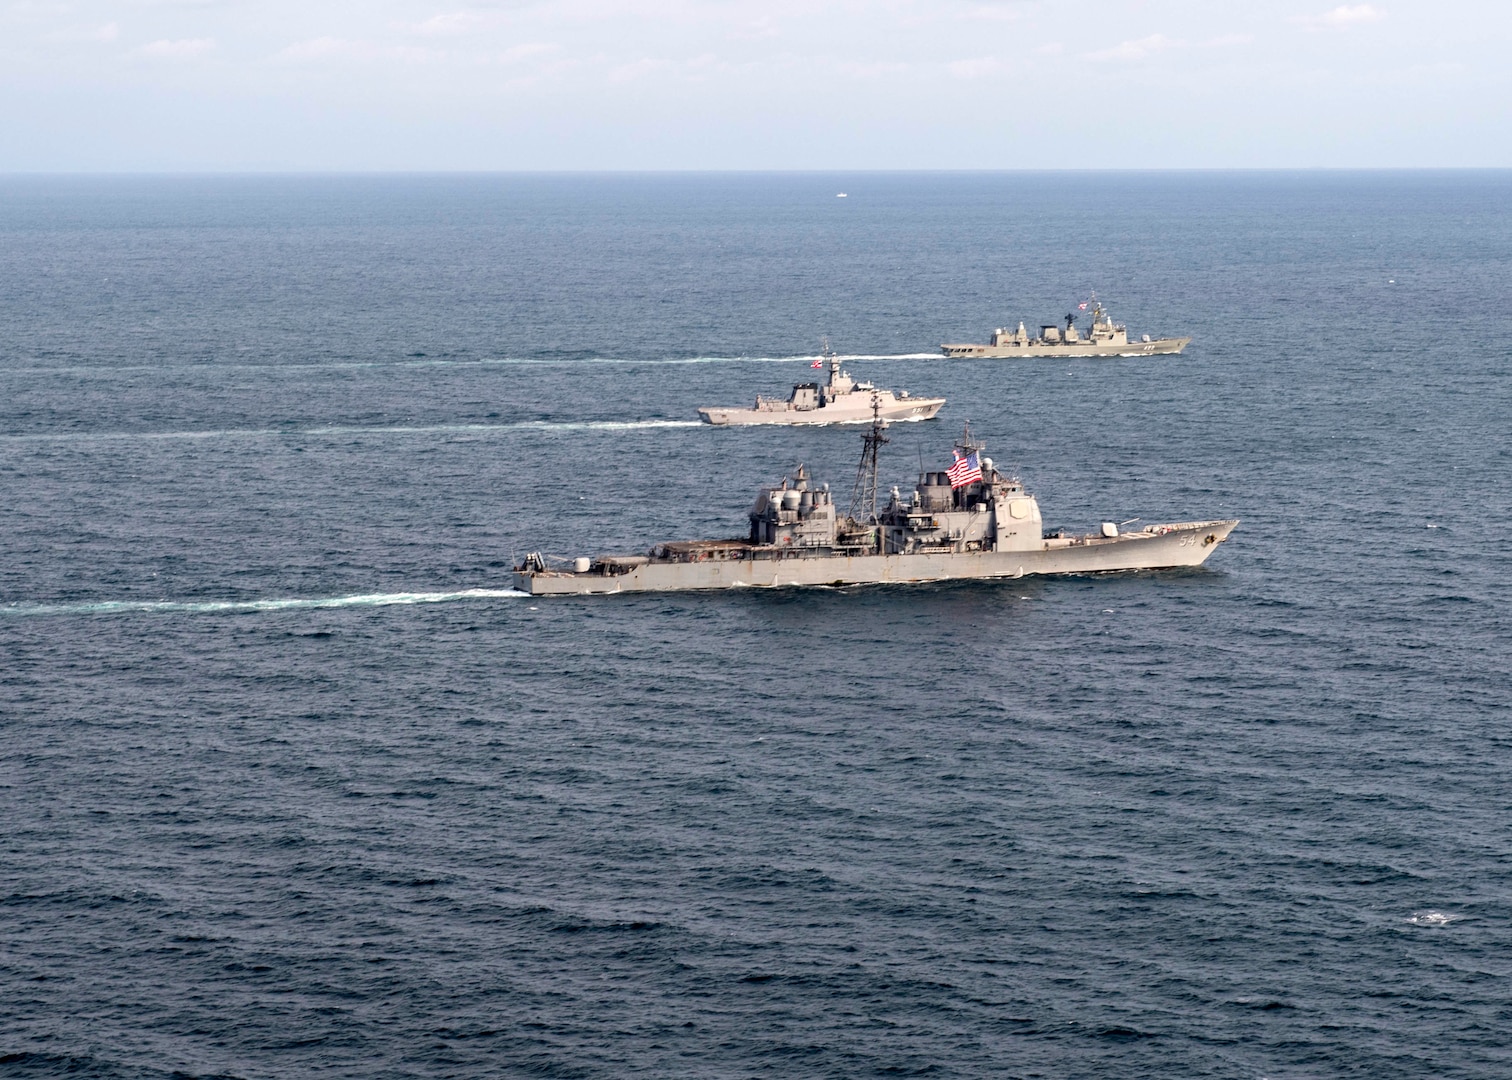 EAST CHINA SEA (Oct. 9, 2018) The Ticonderoga-class guided-missile cruiser USS Antietam (CG 54), the Royal Thai Navy offshore patrol vessel HTMS Krabi (OPV 551) and Royal Thai Navy frigate HTMS Taksin (FFG 422) conduct a tactical maneuvering during a cooperative deployment. Antietam is forward deployed to the U.S. 7th Fleet area of operations in support of security and stability in the Indo-Pacific region.